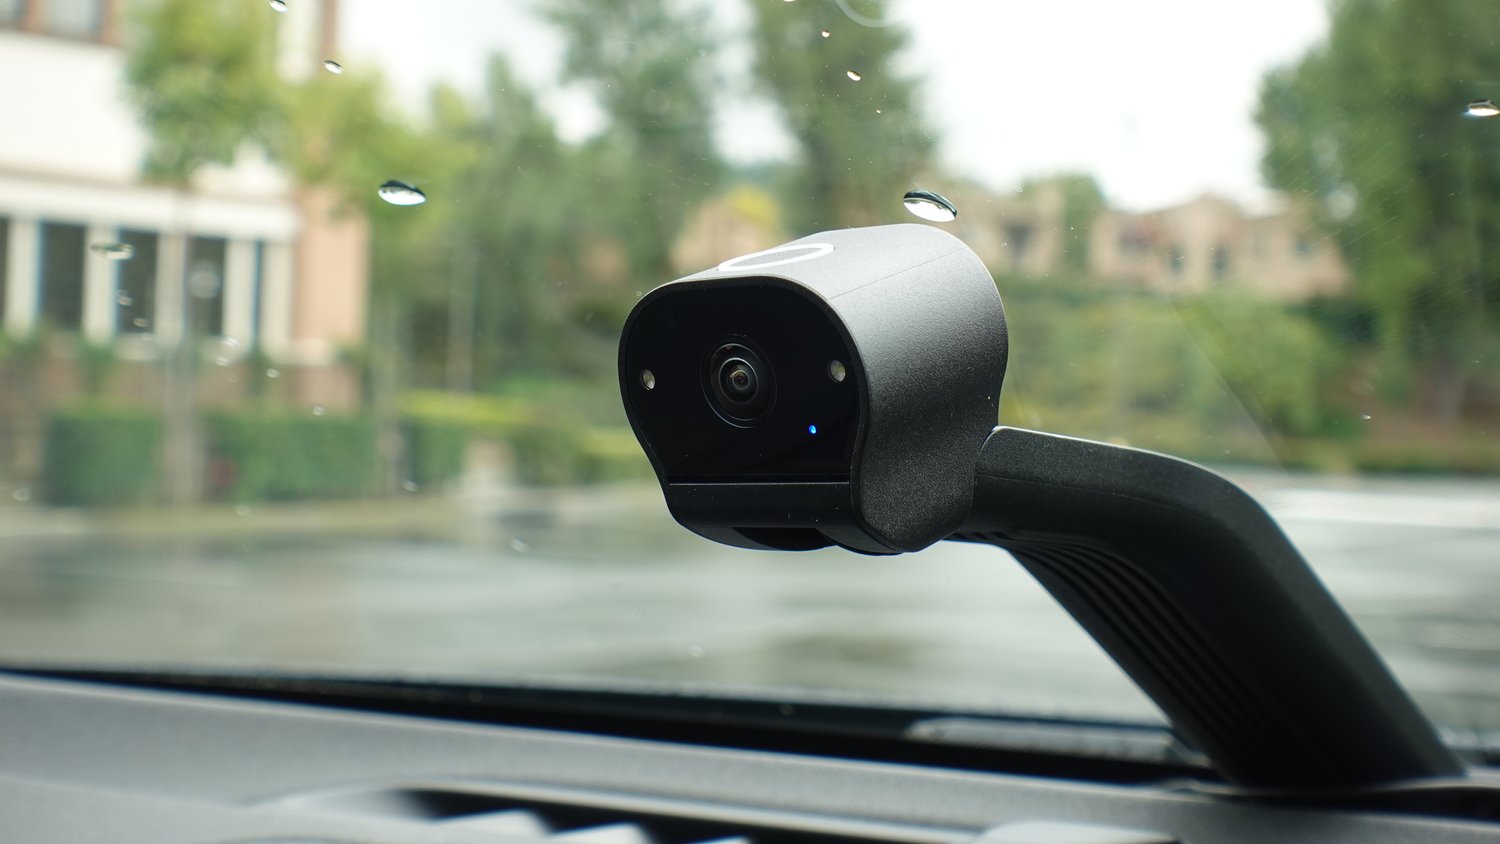 Ring Car Cam Review: Connected Dash Cam Protects at Home or Away